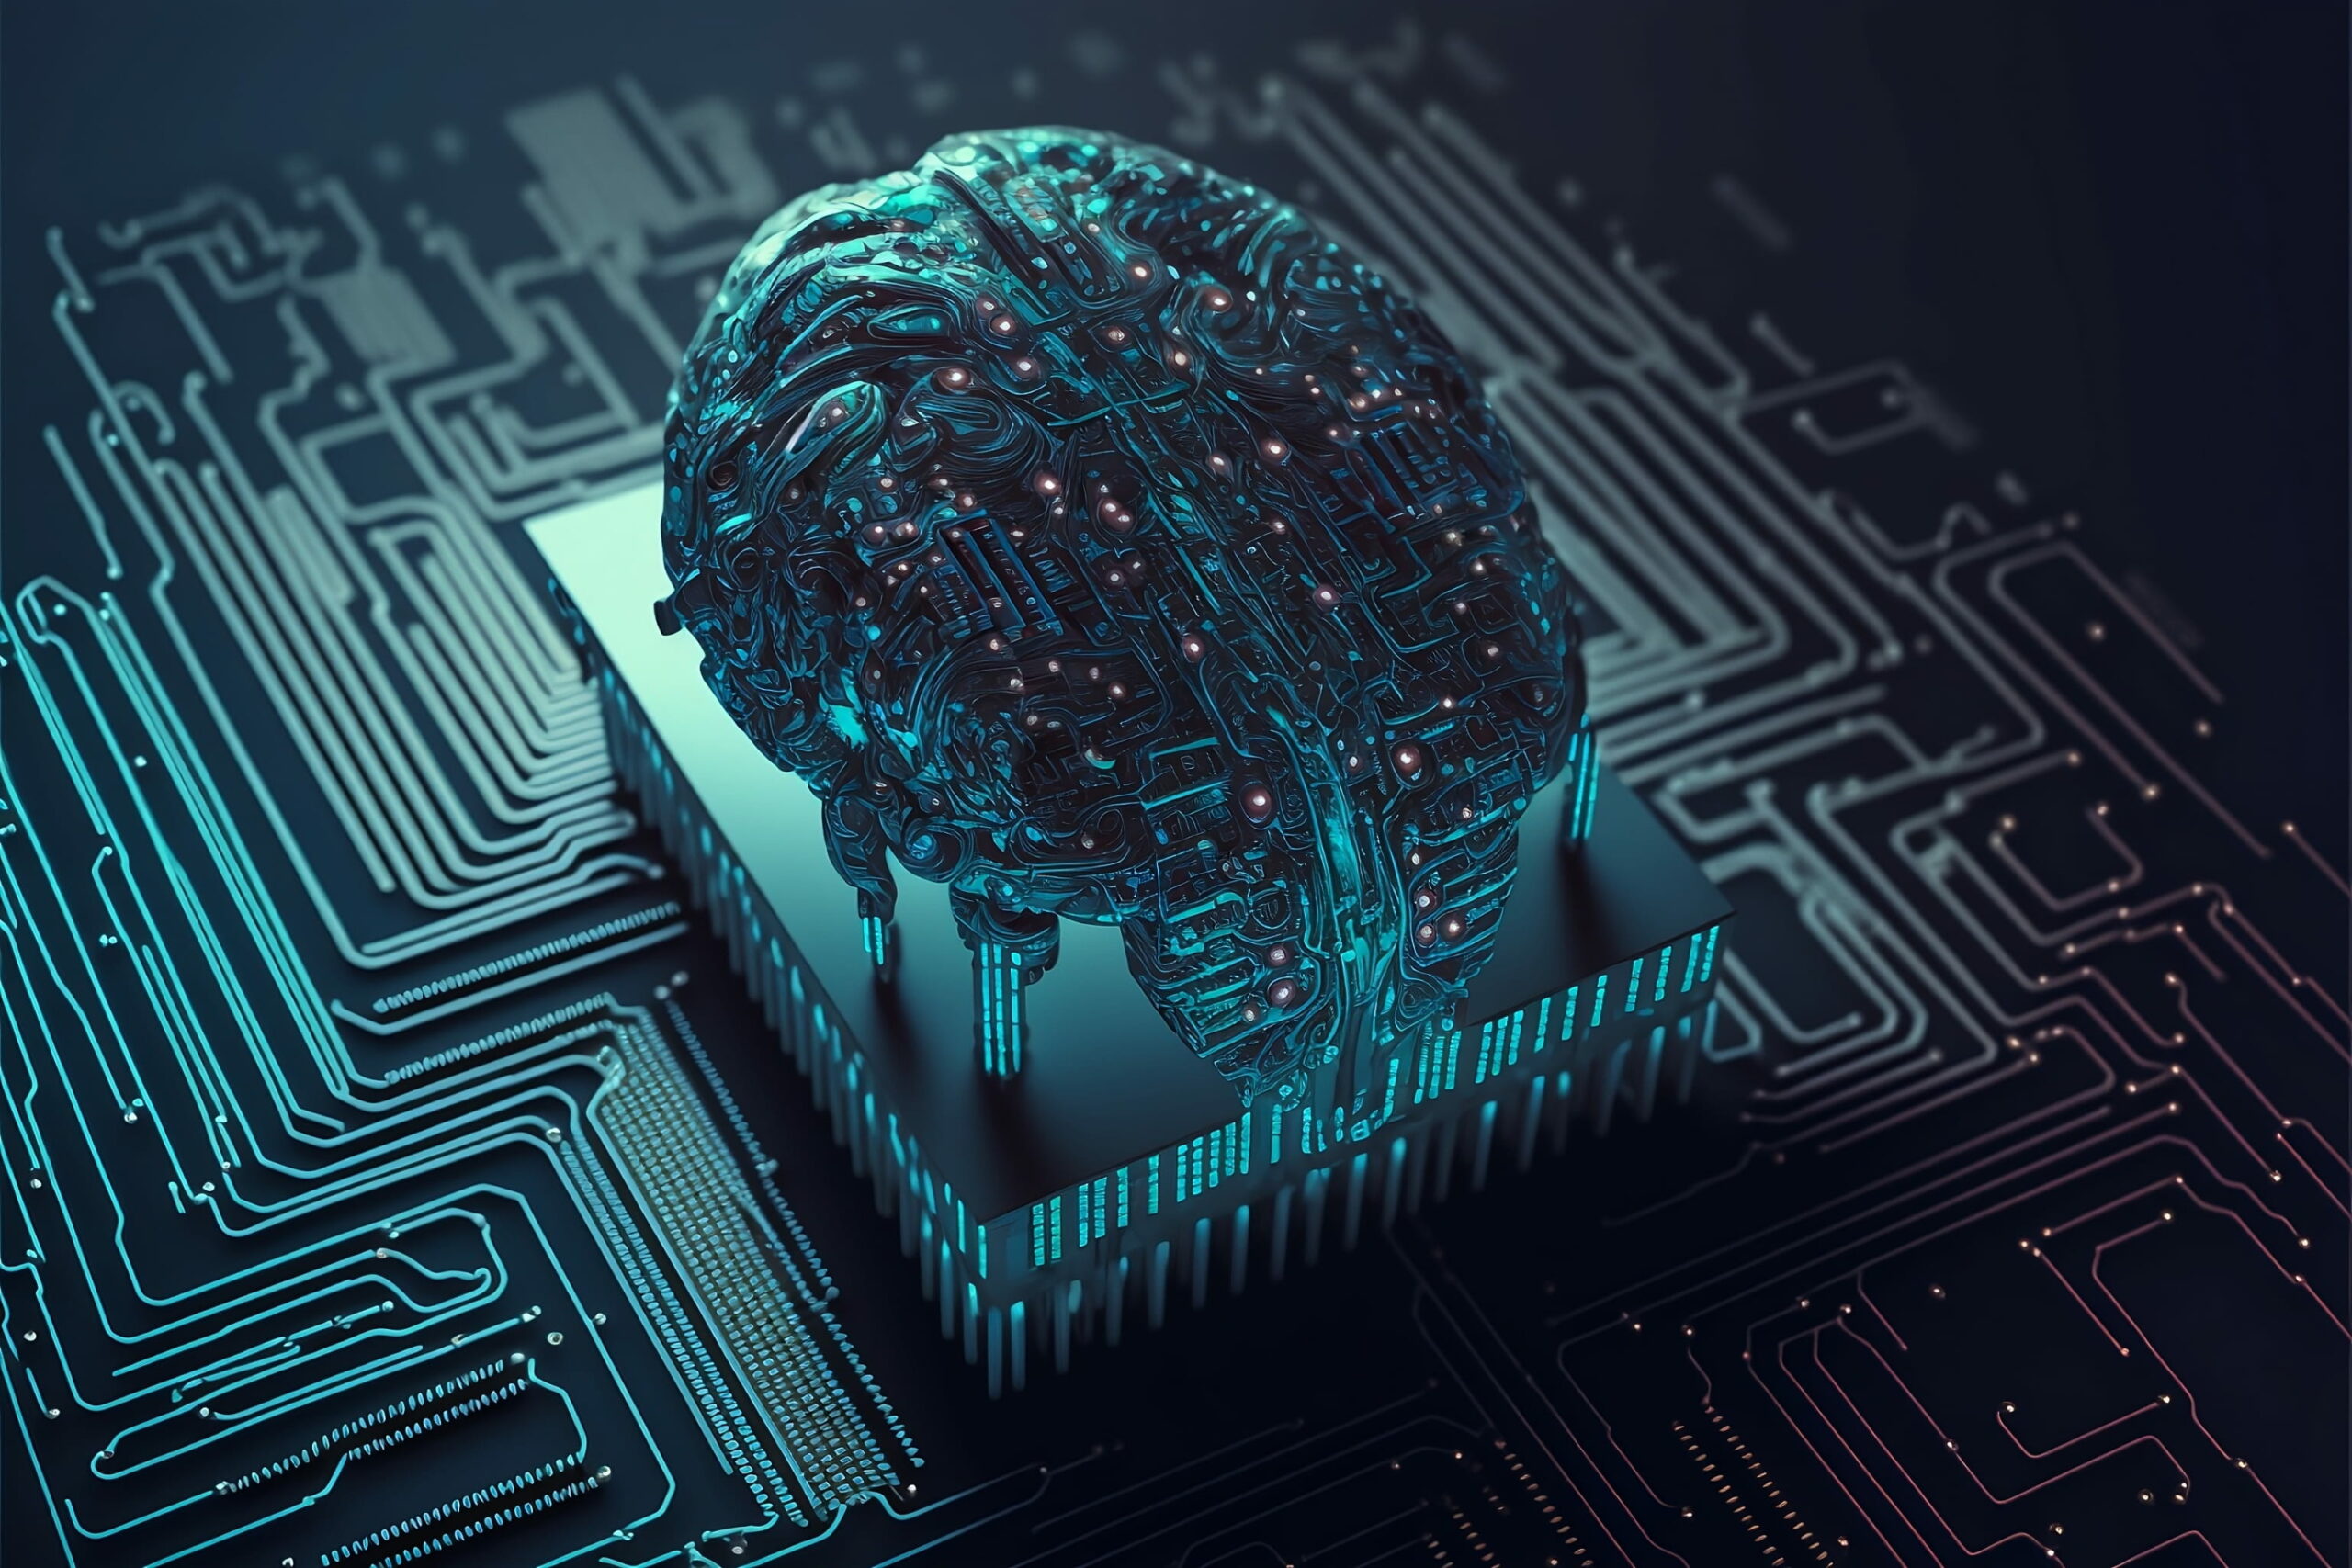 Background image shows networked brain with circuits